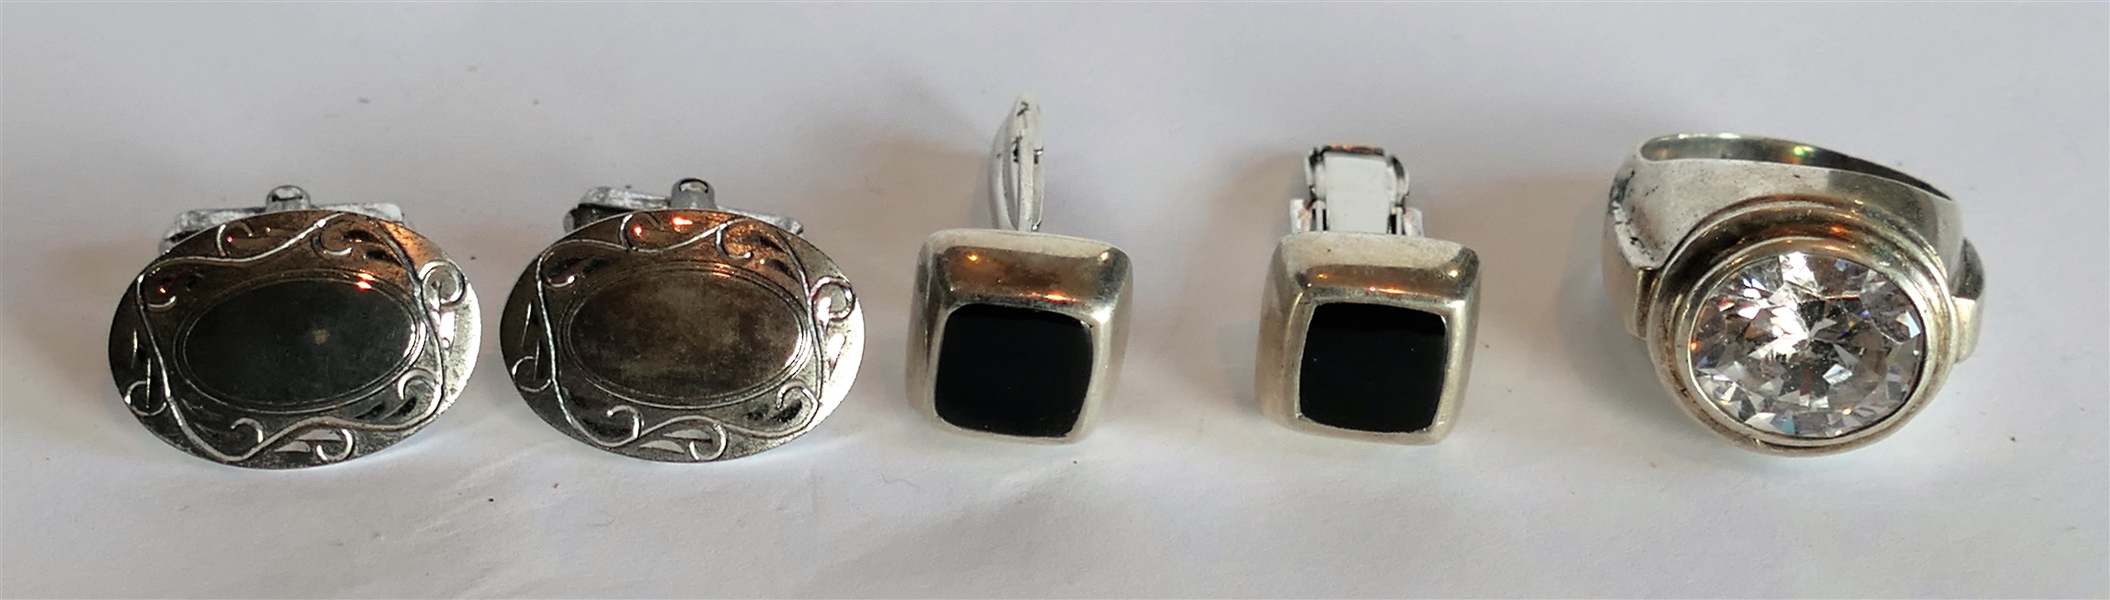 Sterling Silver Silpada Cufflinks, Sterling Silver Oval Cuff Links, and Sterling Silver Ring with Large Clear Stone - Size 9